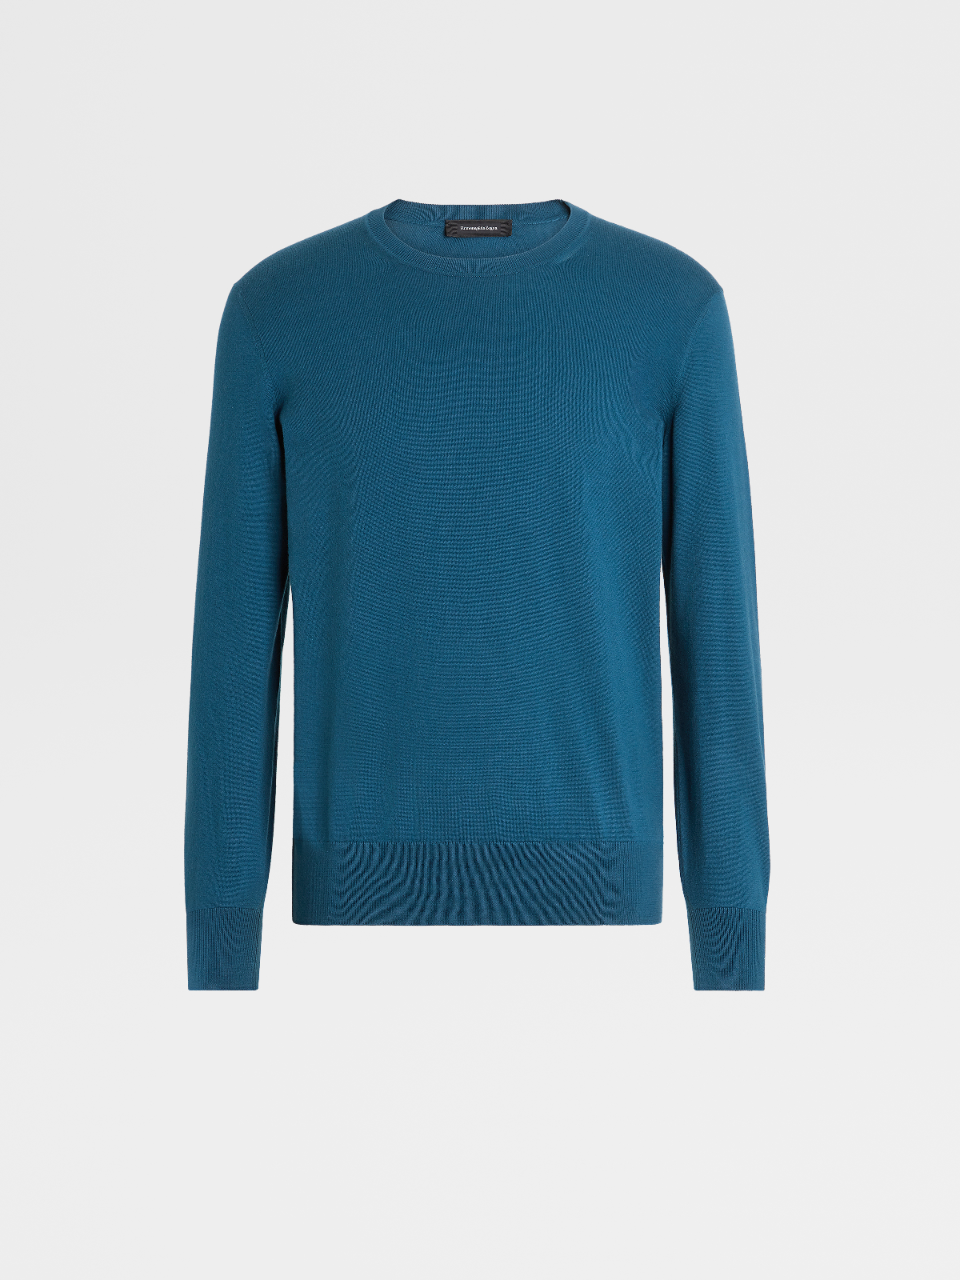 Teal Blue Baby Island Cotton and Cashmere Knit Crewneck